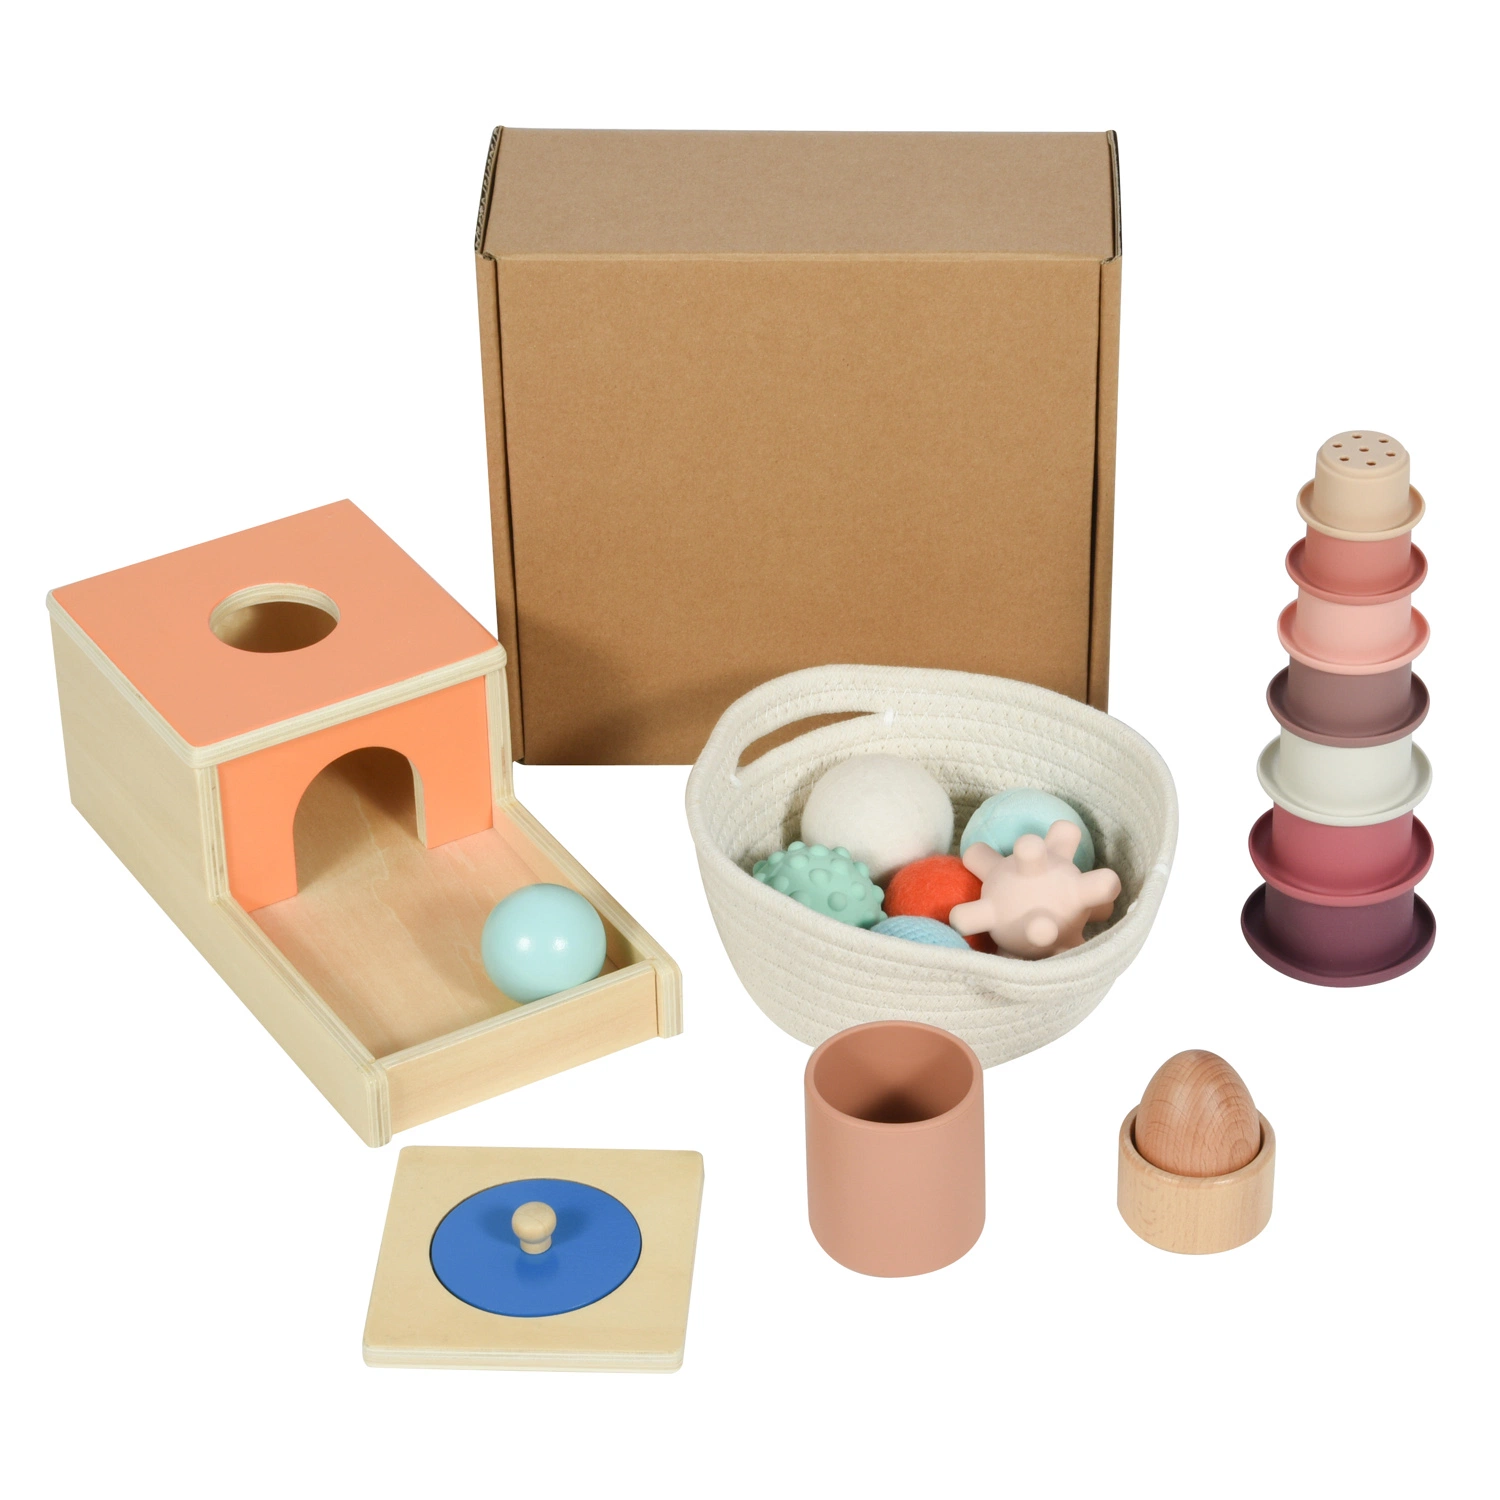 Wooden Toy Montessori Kids Subscription Box Educational Toy